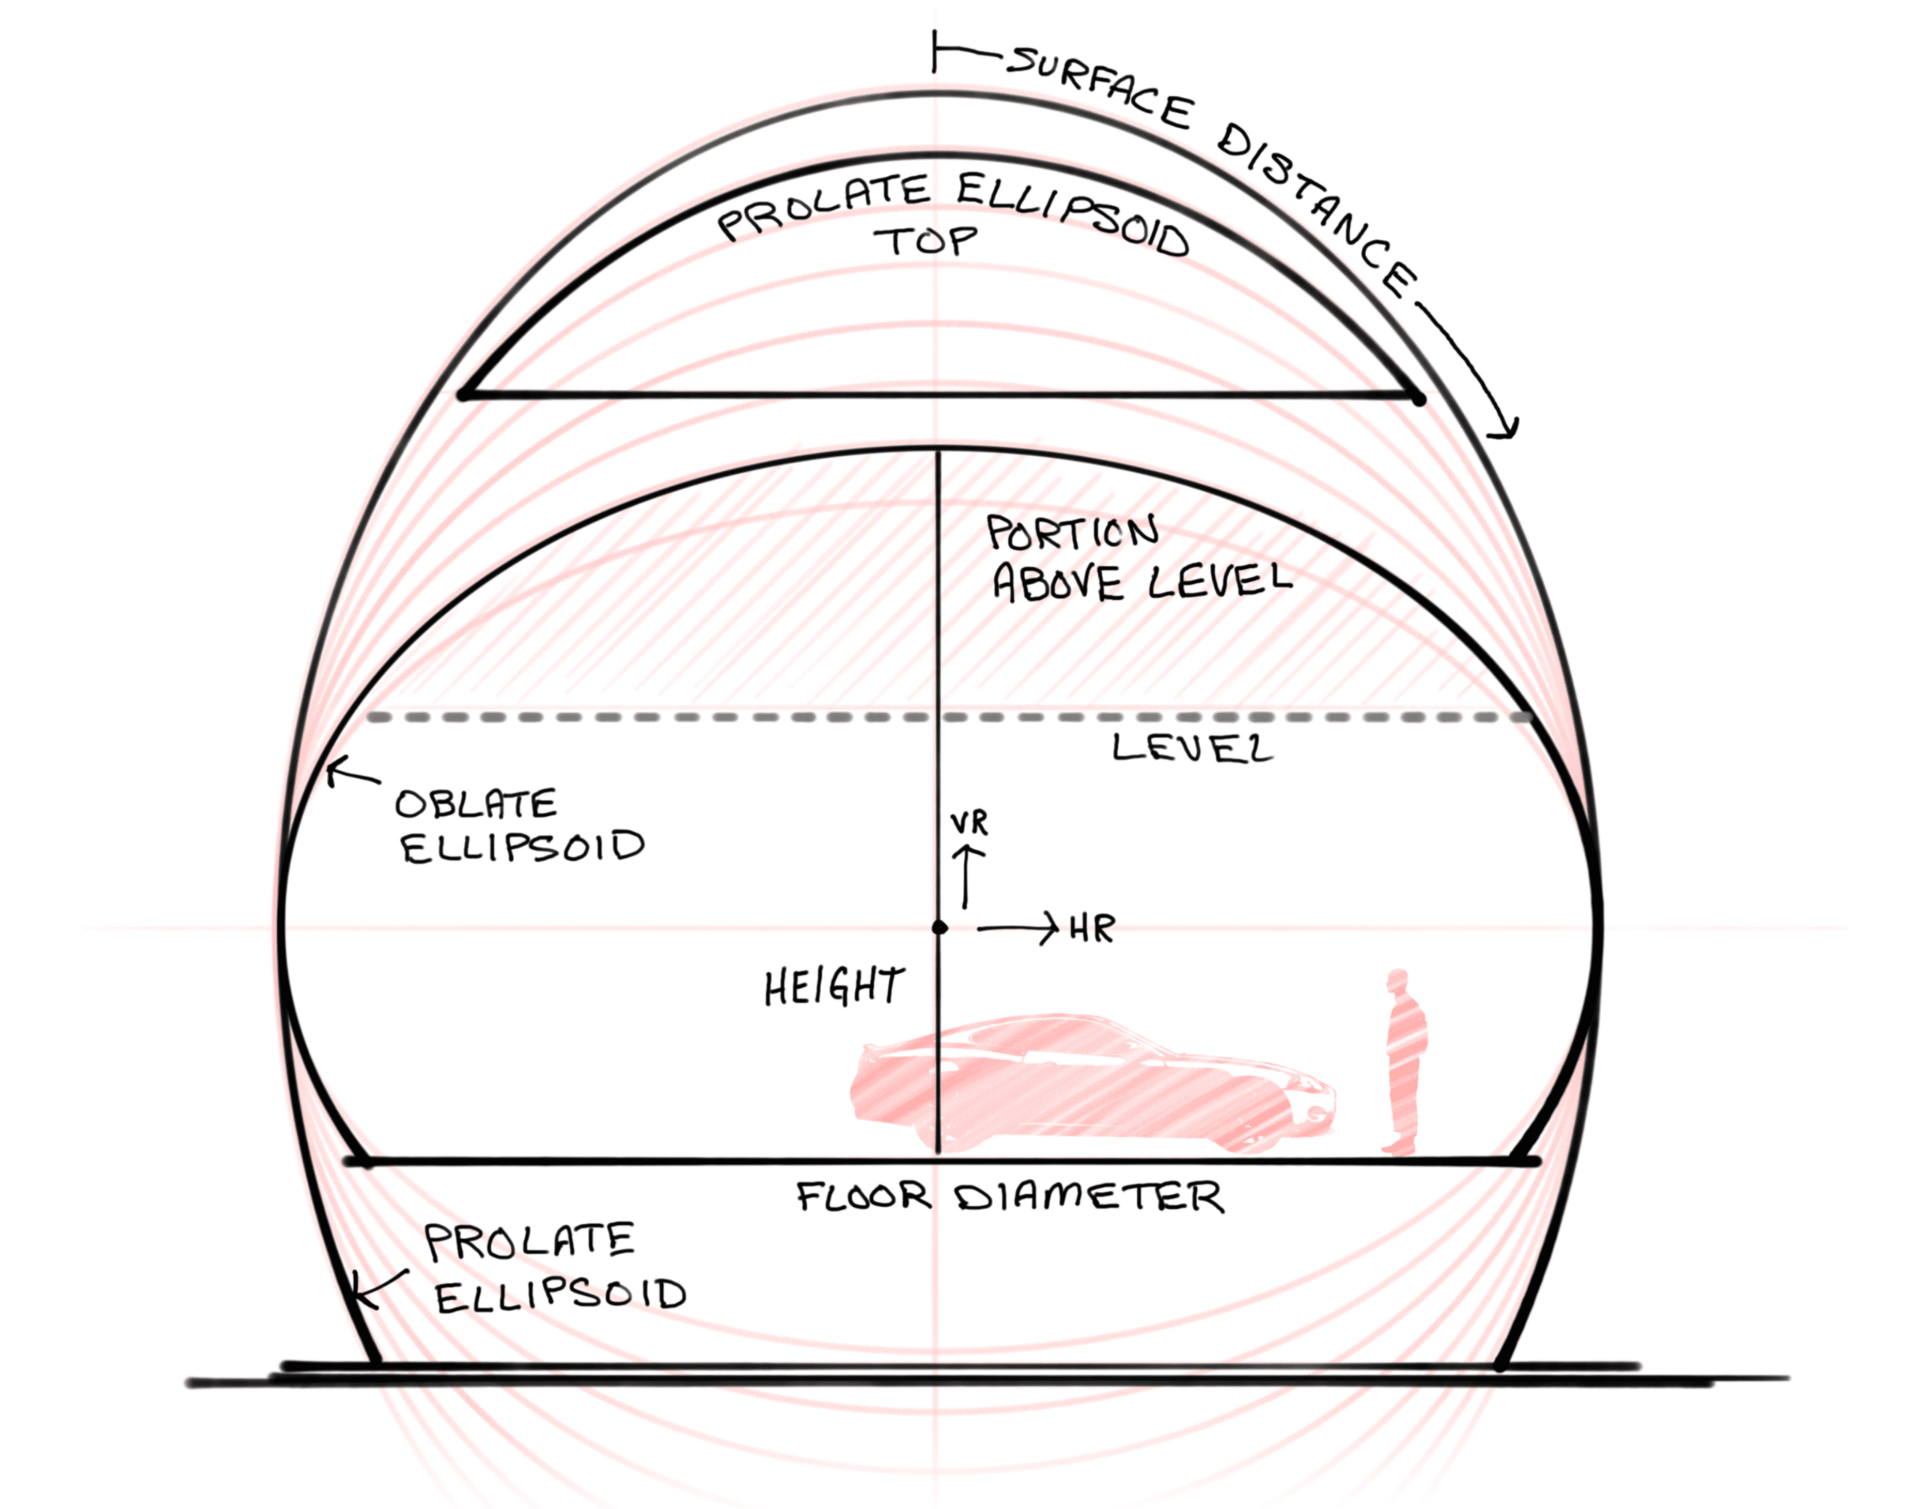 Sketch of concepts used in the vertical ellipsoid dome calculator